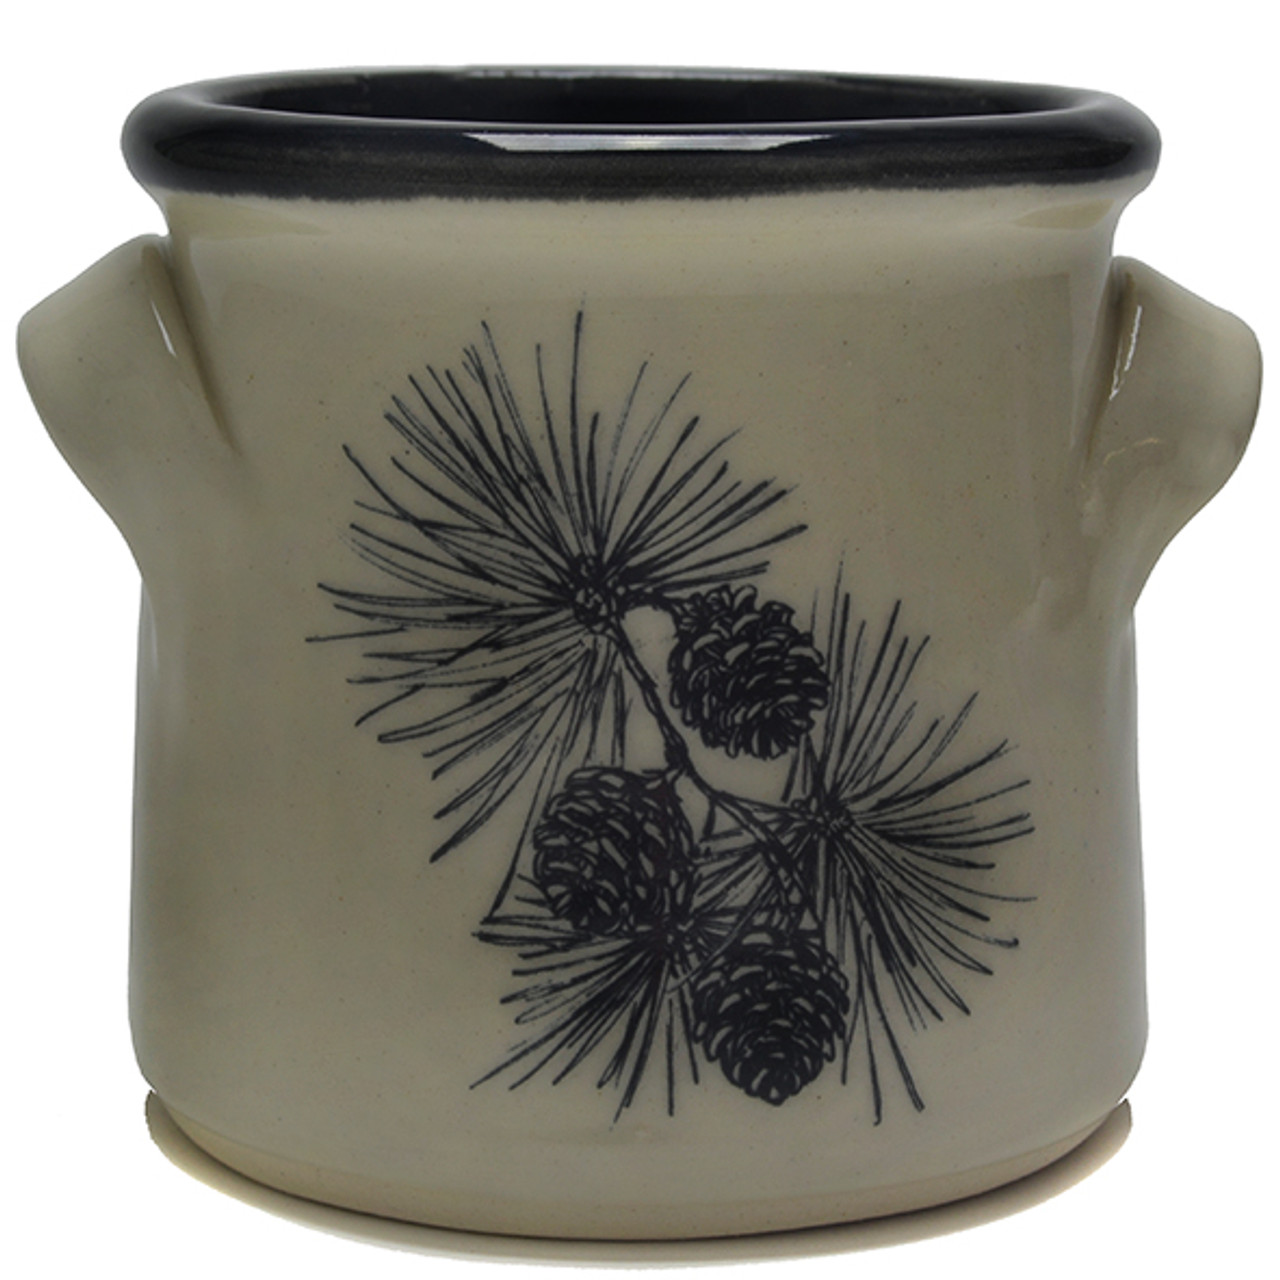 https://cdn11.bigcommerce.com/s-elo1orw/images/stencil/1280x1280/products/1505/2830/Pottery-Crock-Pinecone__61394.1486148634.jpg?c=2